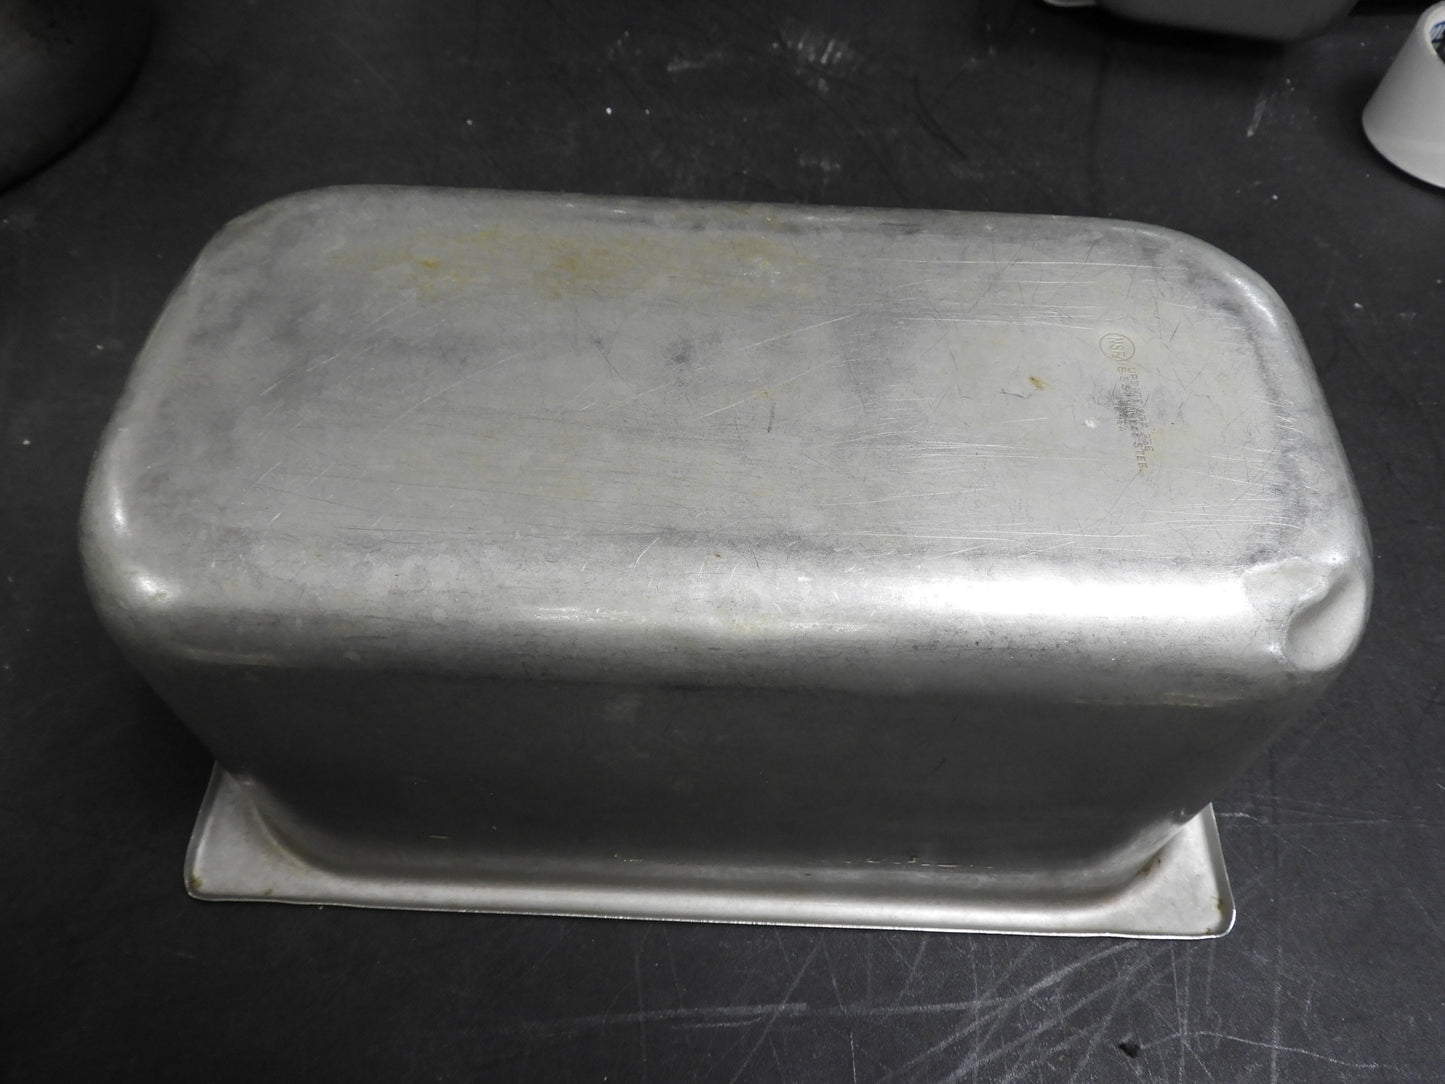 1/3 Size Stainless Steel Steam Table / Hotel Pan - 6" Deep C IP